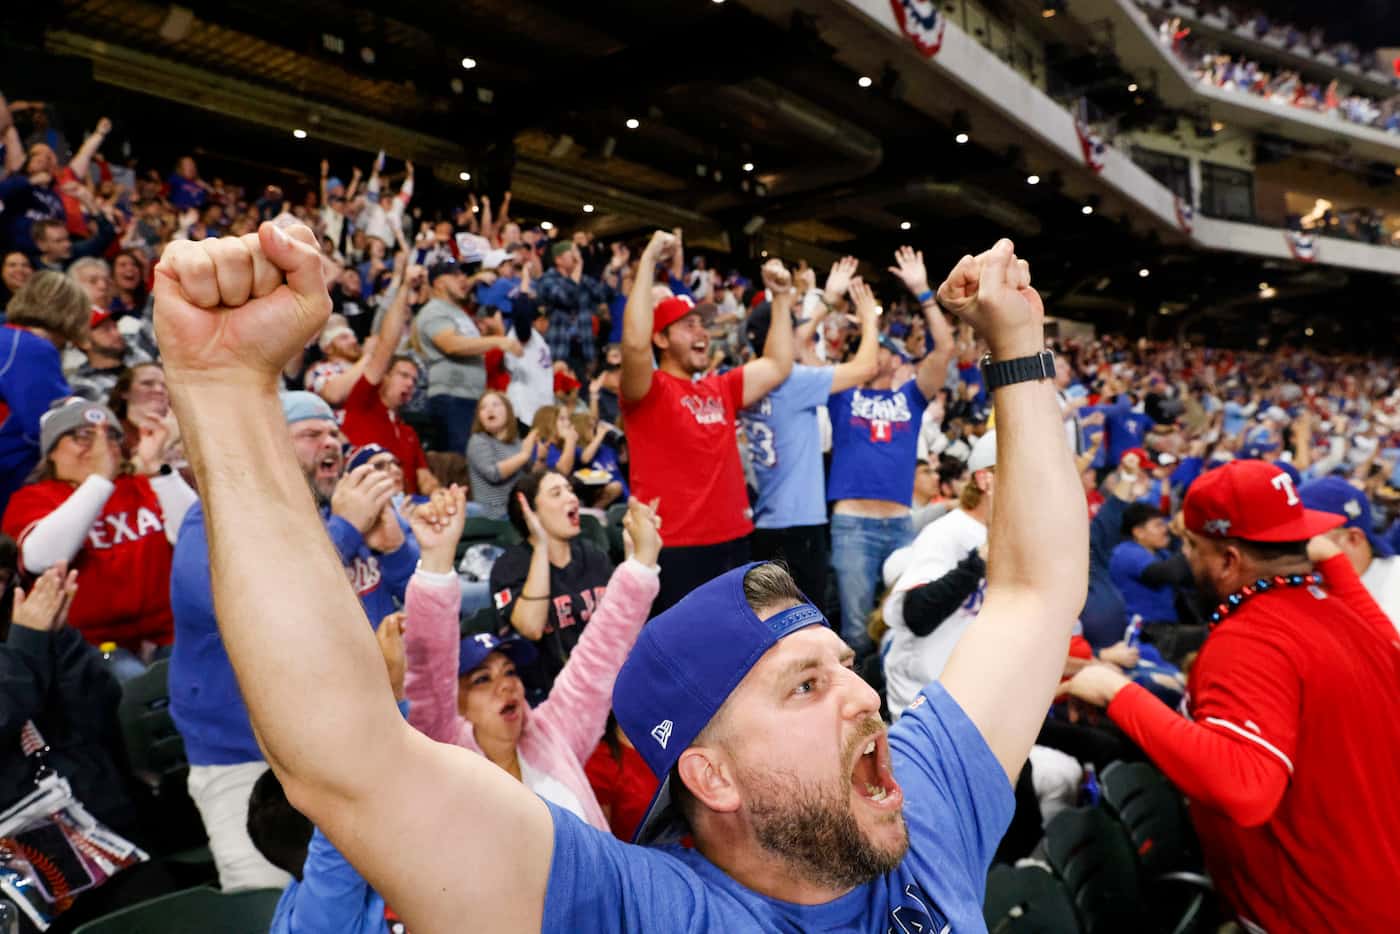 Brandon Moosberg including other Texas Rangers fan celebrate during the end of sixth inning...